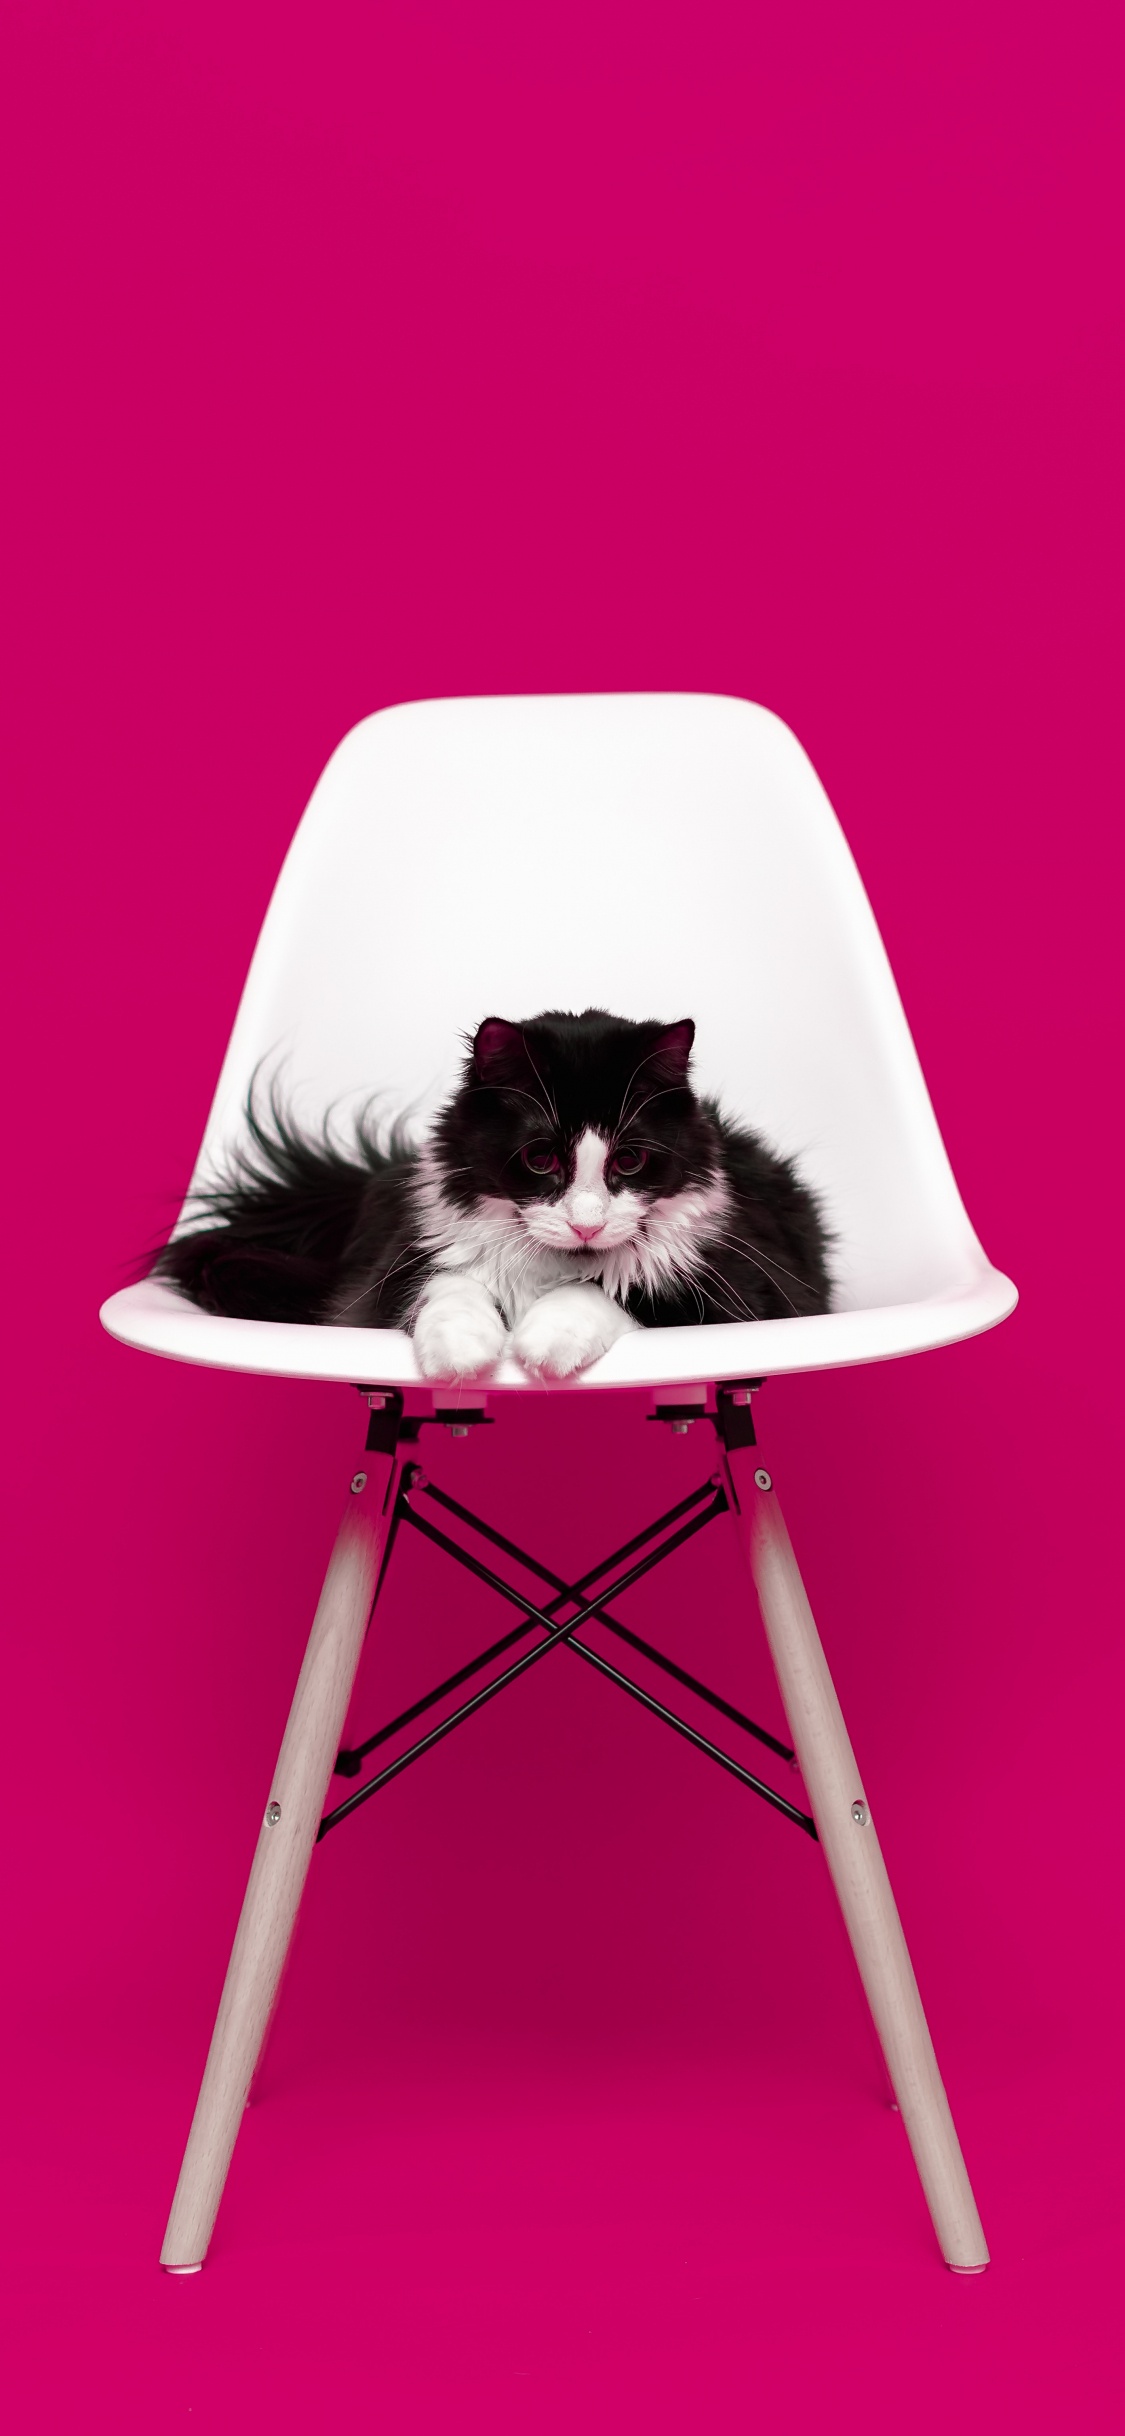 Black and White Cat on White Chair. Wallpaper in 1125x2436 Resolution